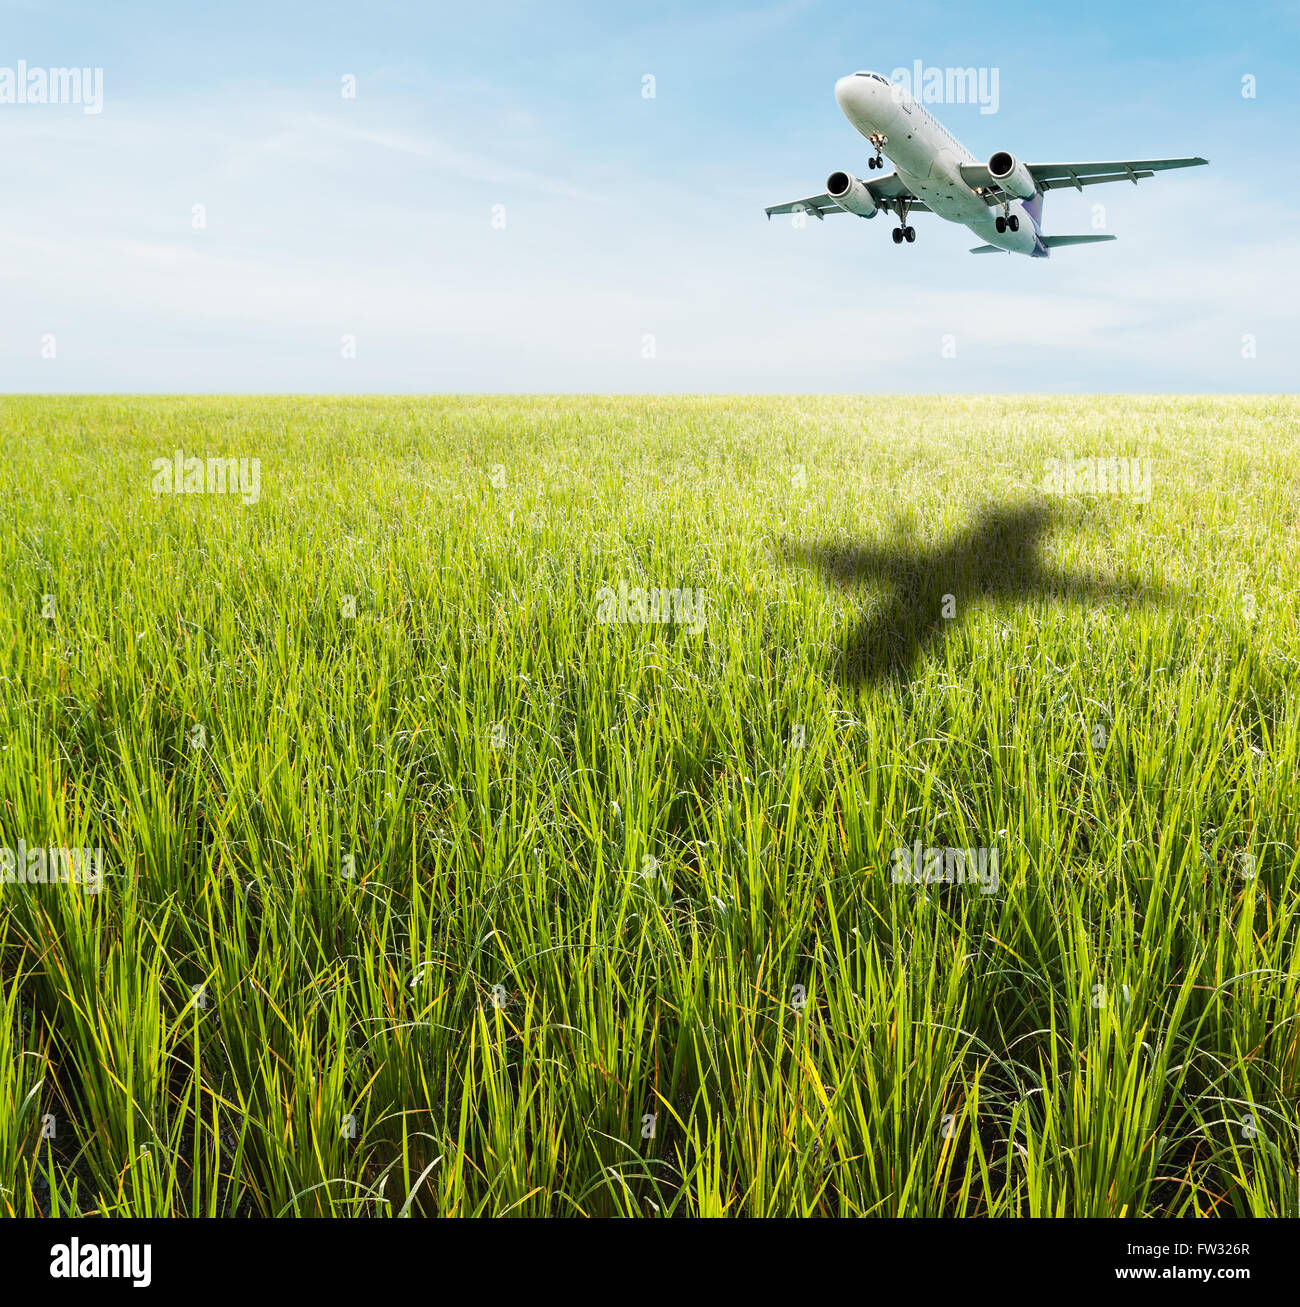 Green grass field with bright blue sky and airplane landing Stock Photo